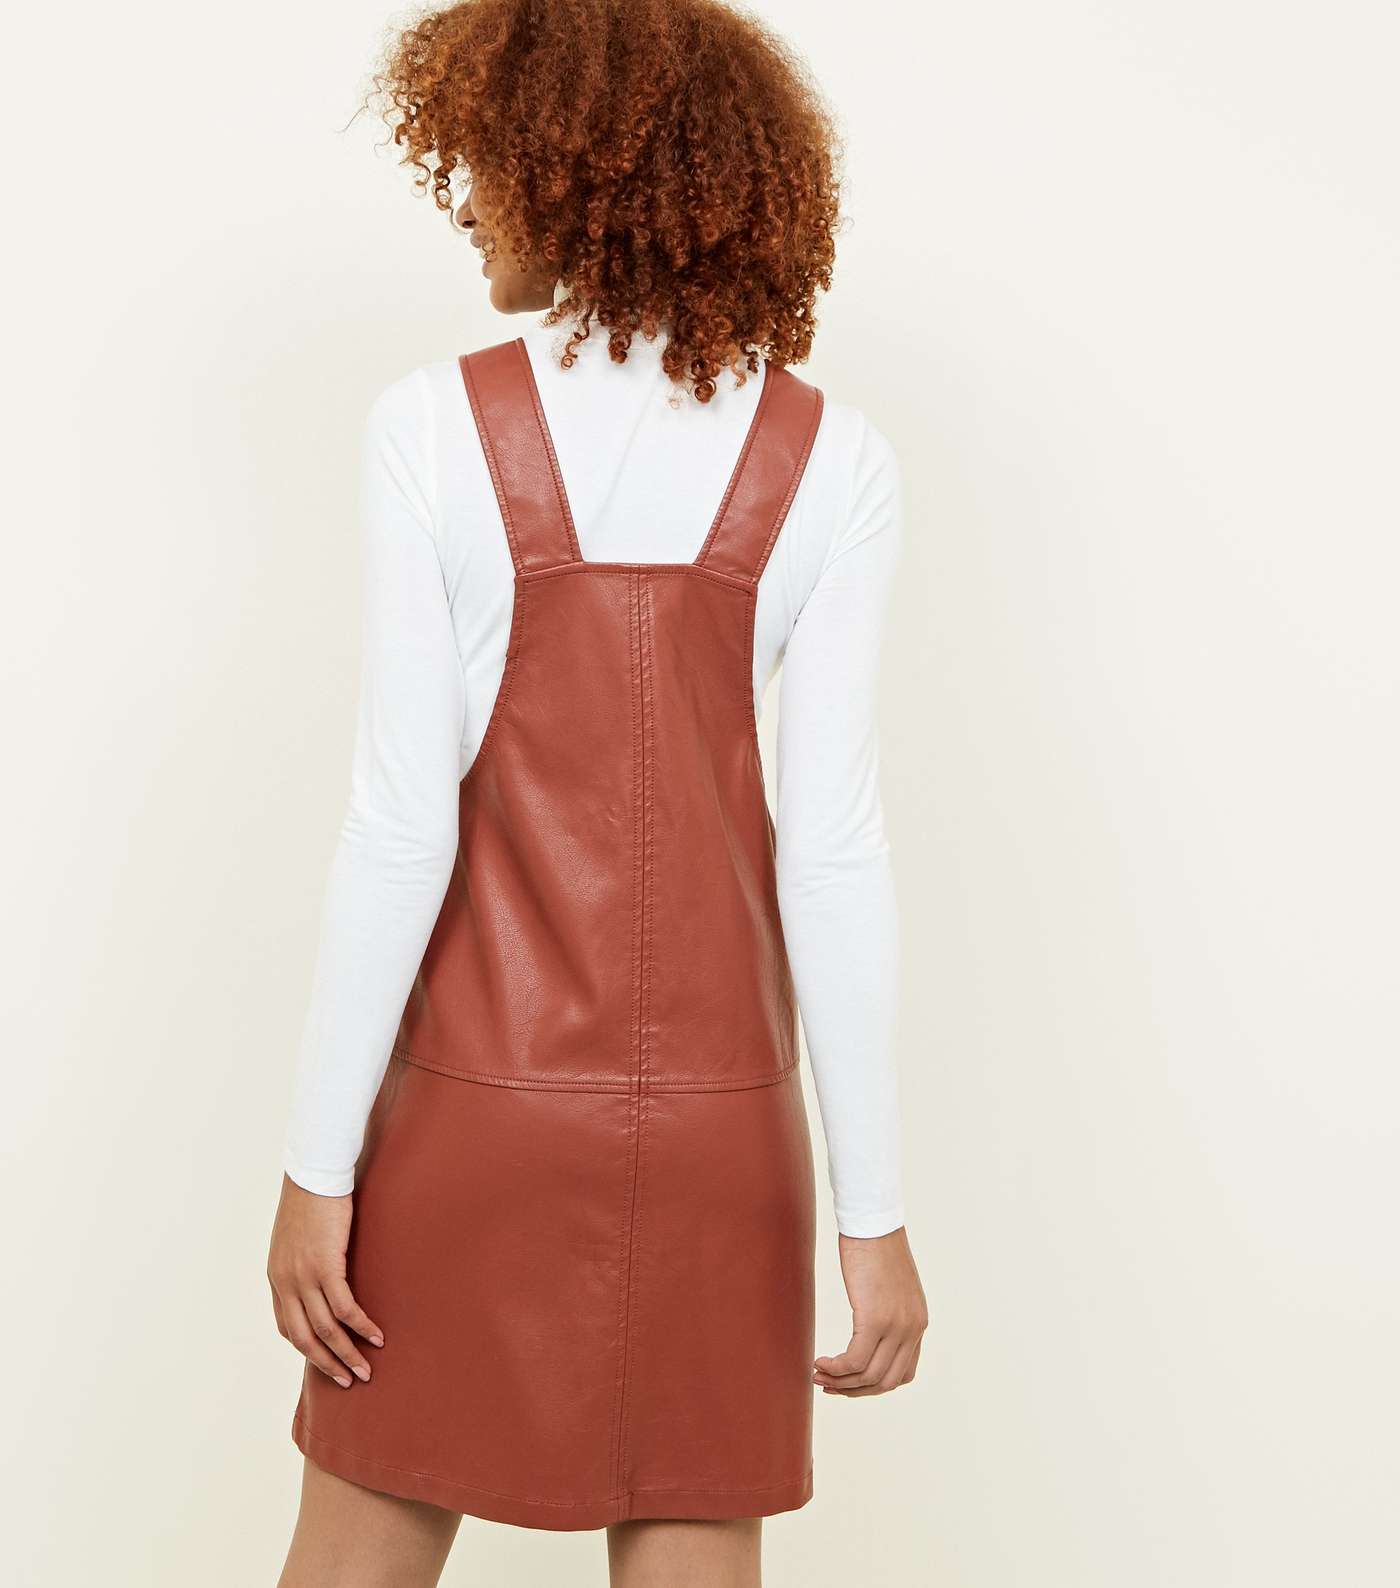 Tan Leather-Look Pinafore Dress Image 2